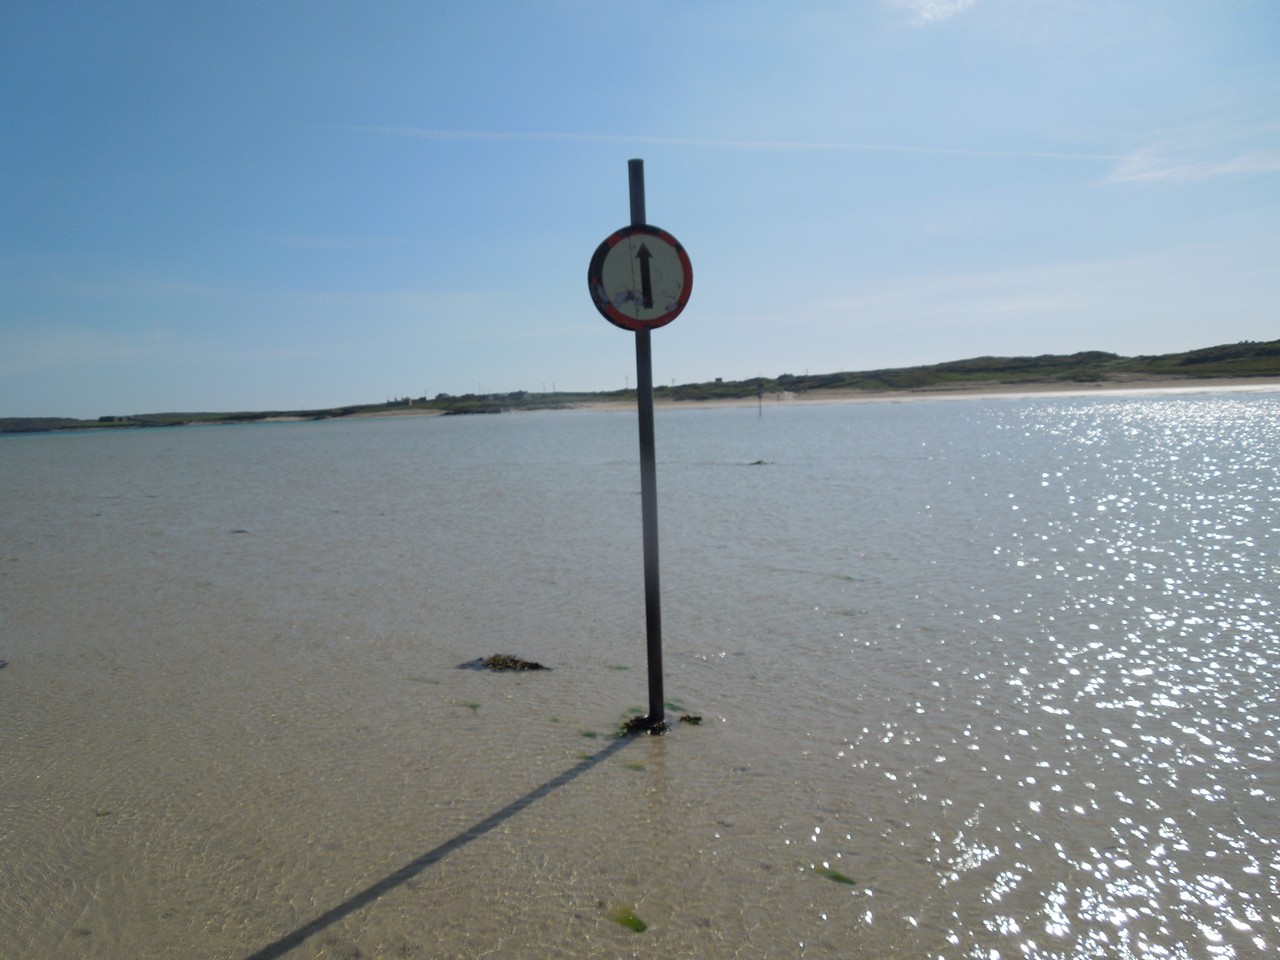 The 'road' to and from the island is clear at low tide.